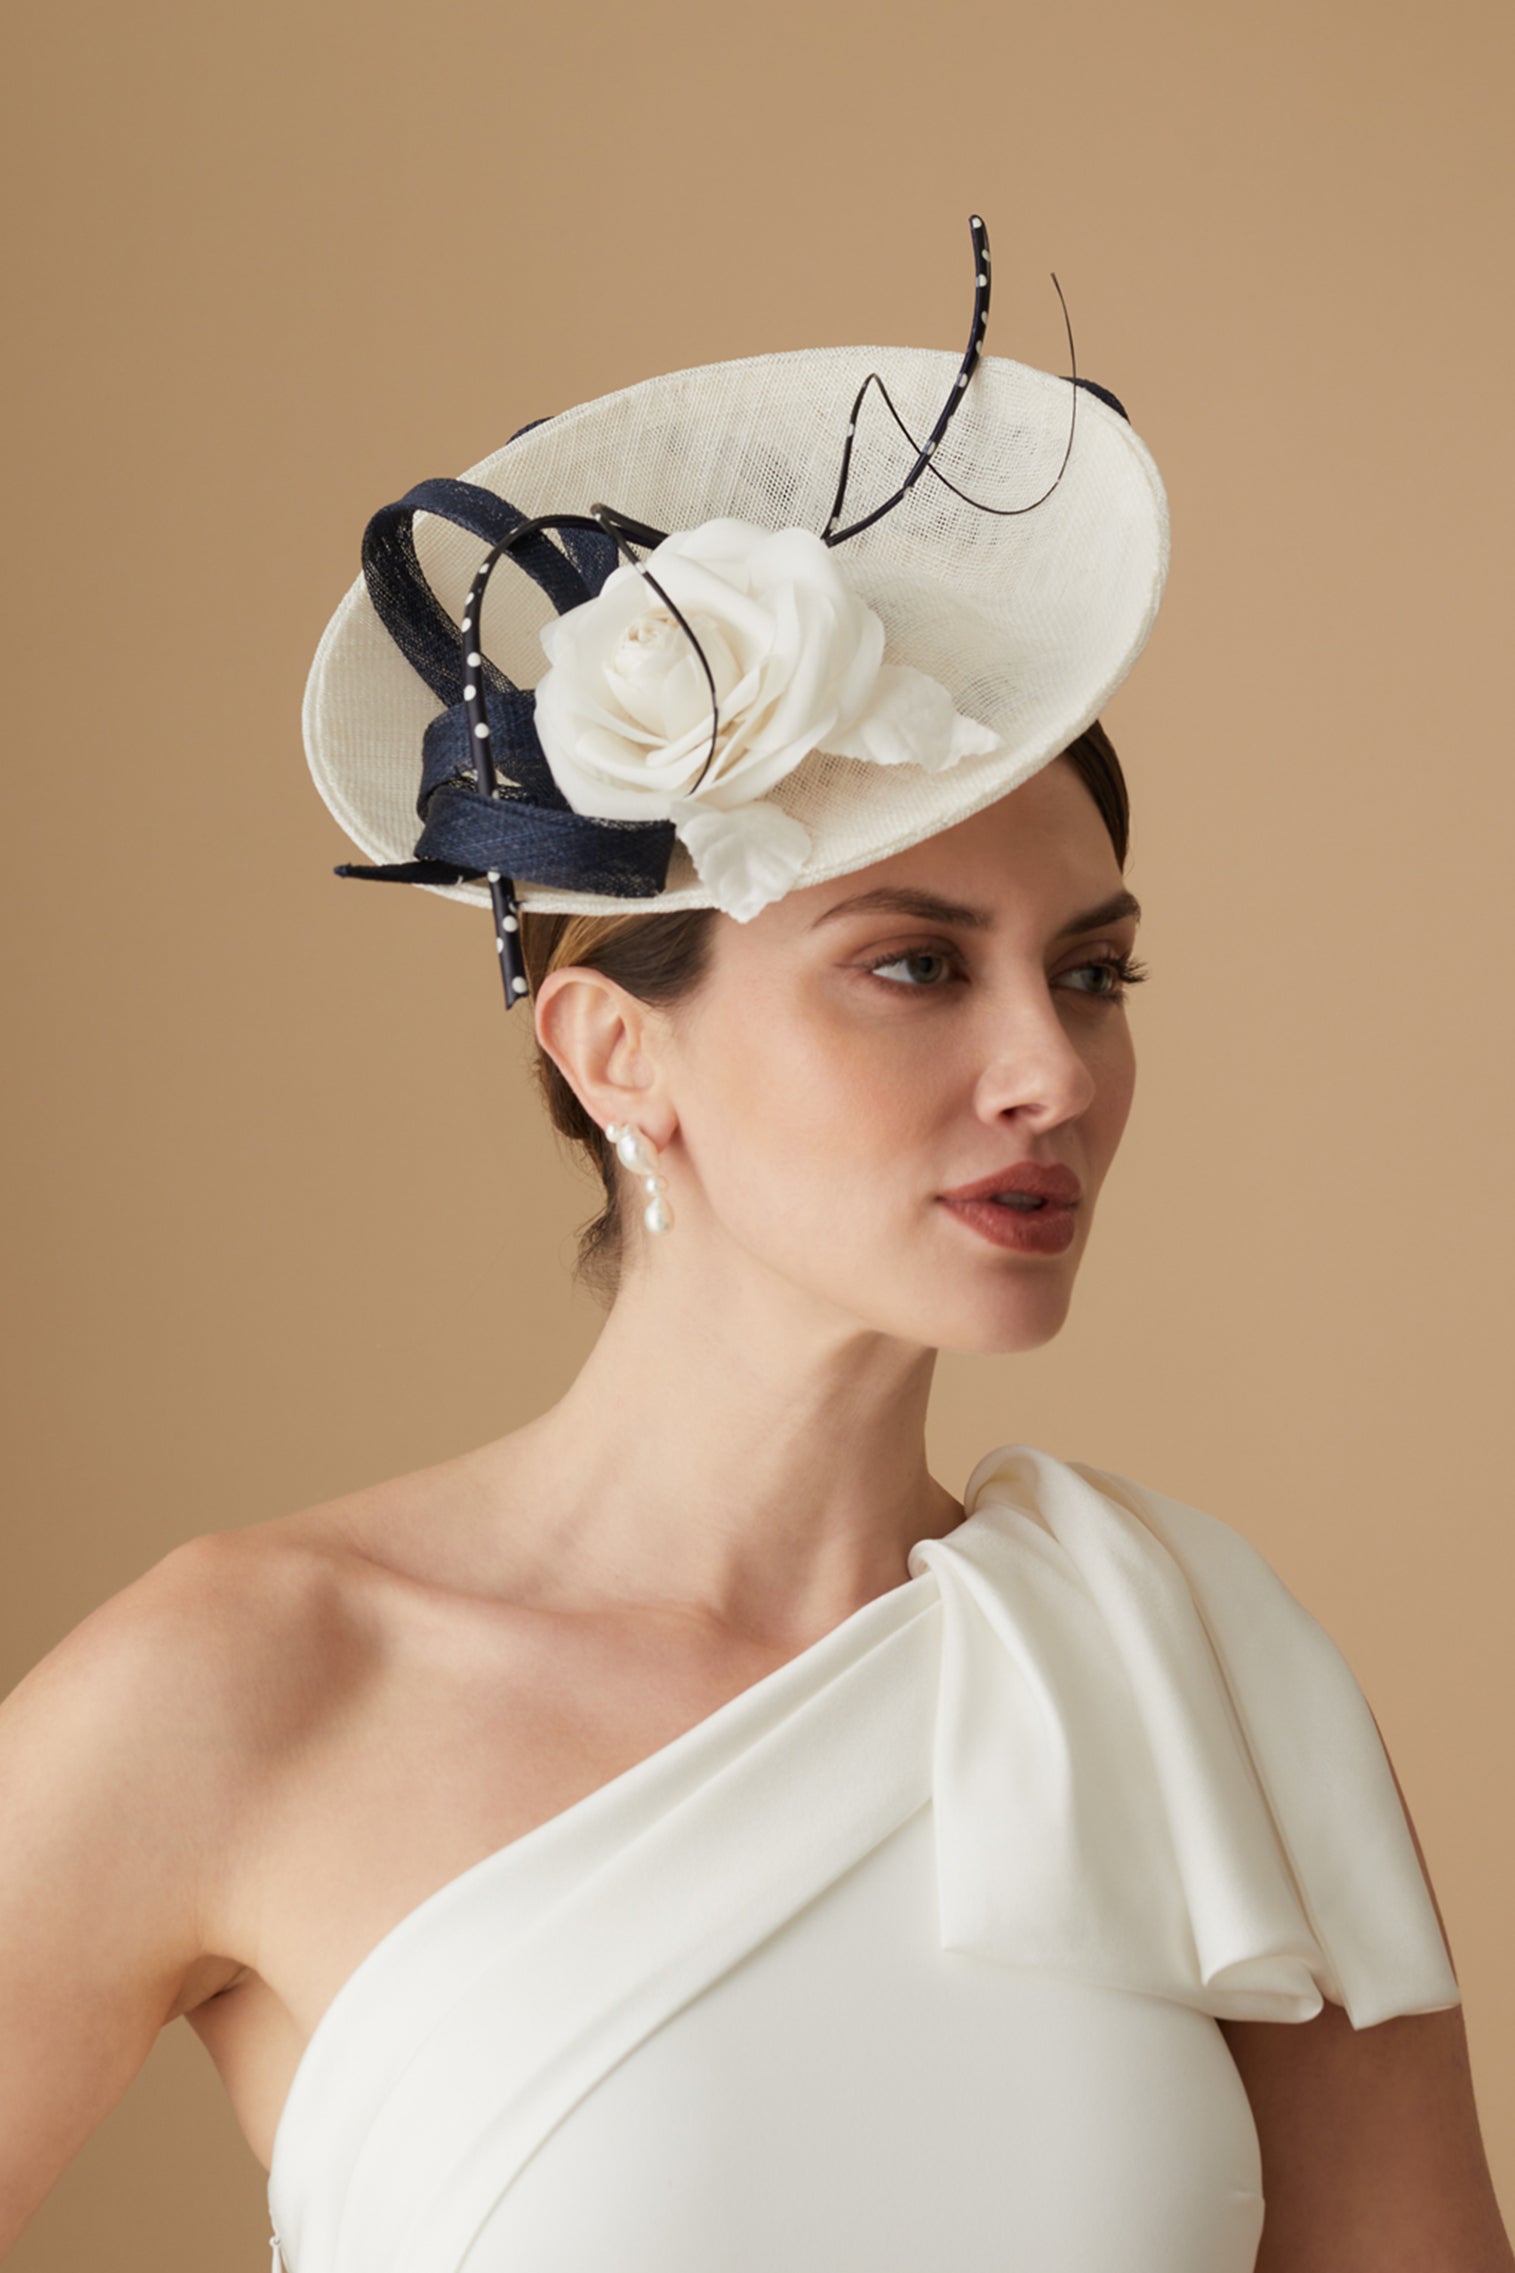 Assam White and Navy Saucer Hat - New Season Hat Collection - Lock & Co. Hatters London UK